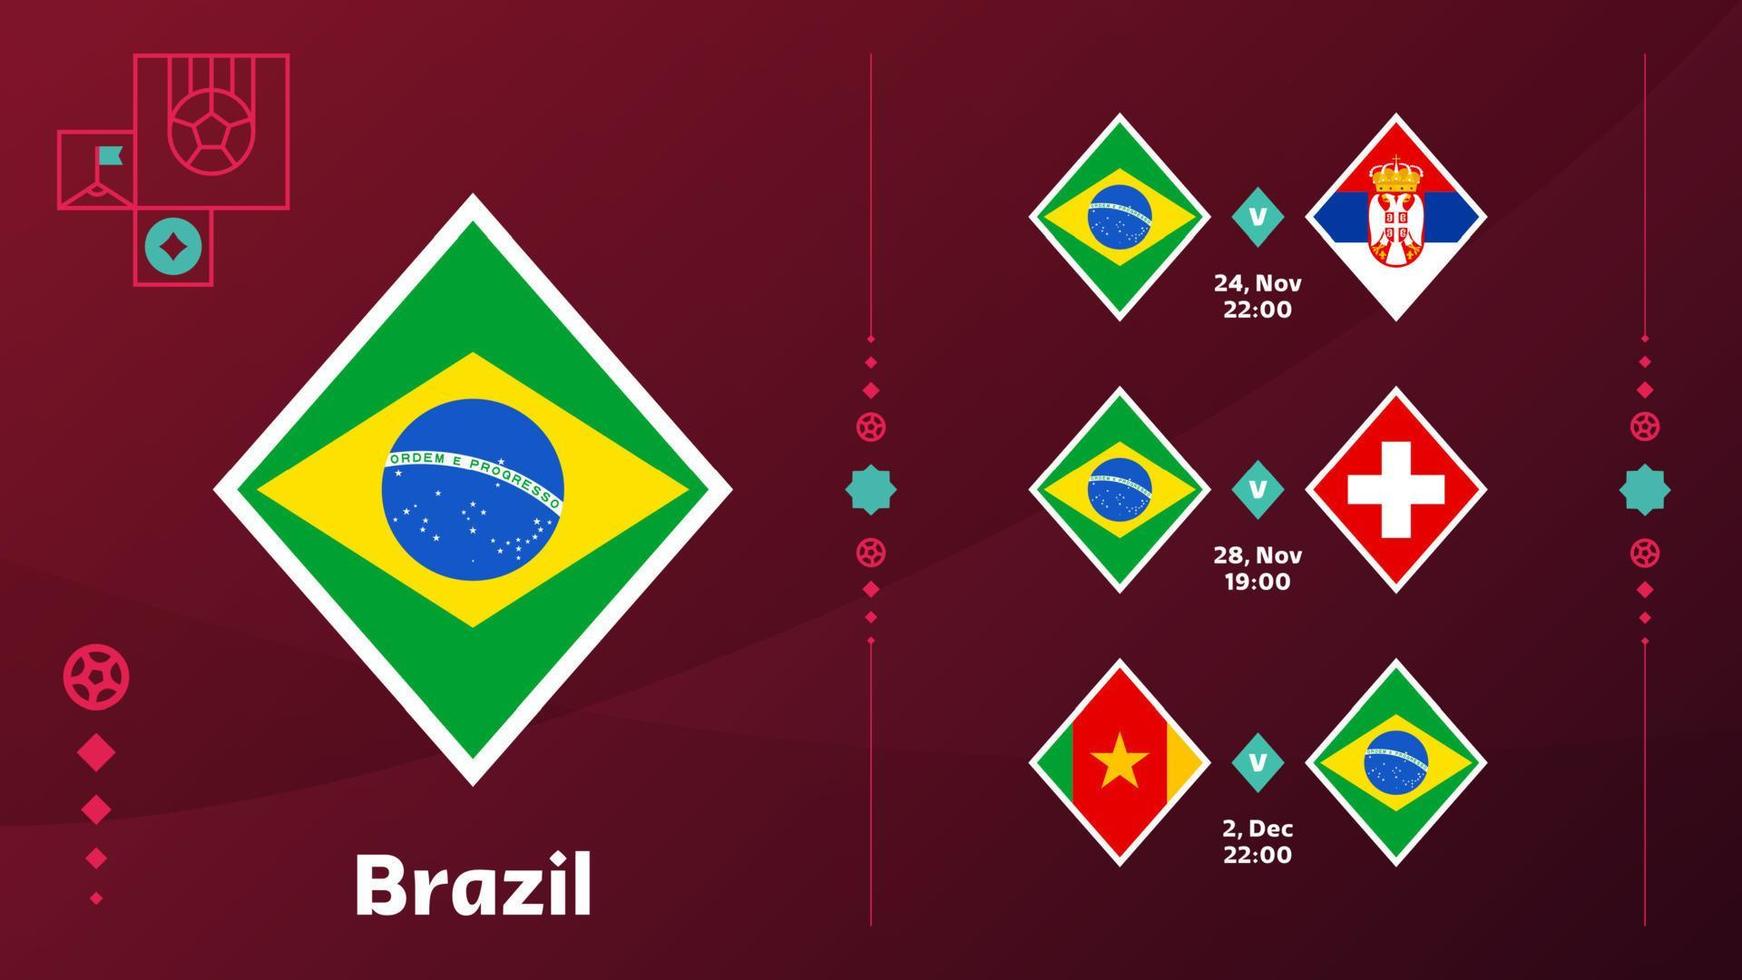 brazil national team Schedule matches in the final stage at the 2022 Football World Championship. Vector illustration of world football 2022 matches.